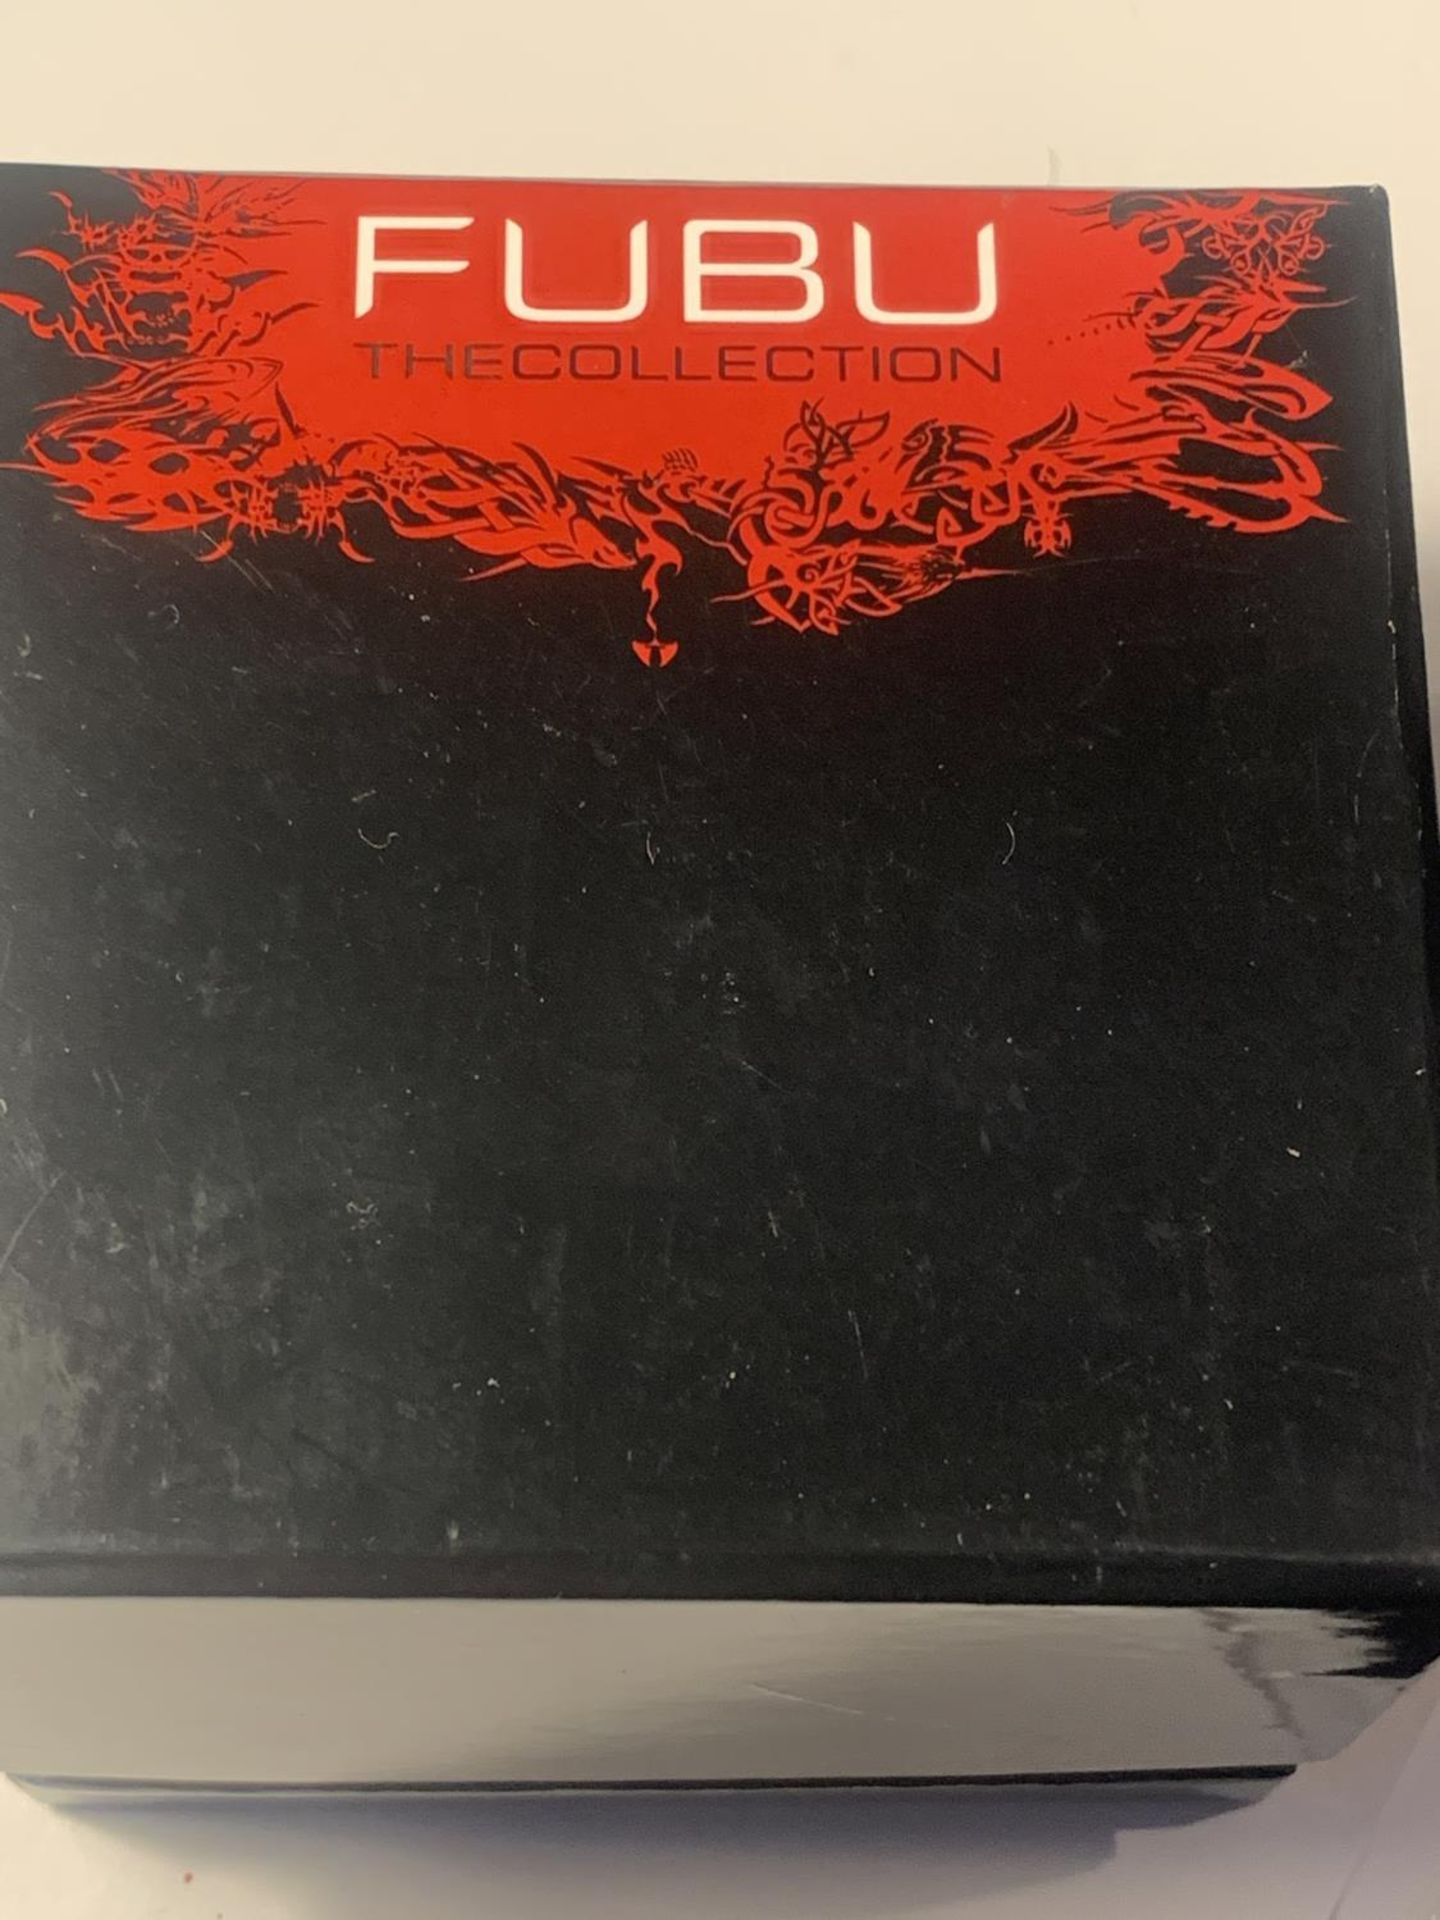 AN AS NEW AND BOXED FUBU WRISTWATCH SEEN WORKING BUT NO WARRANTY - Image 4 of 4